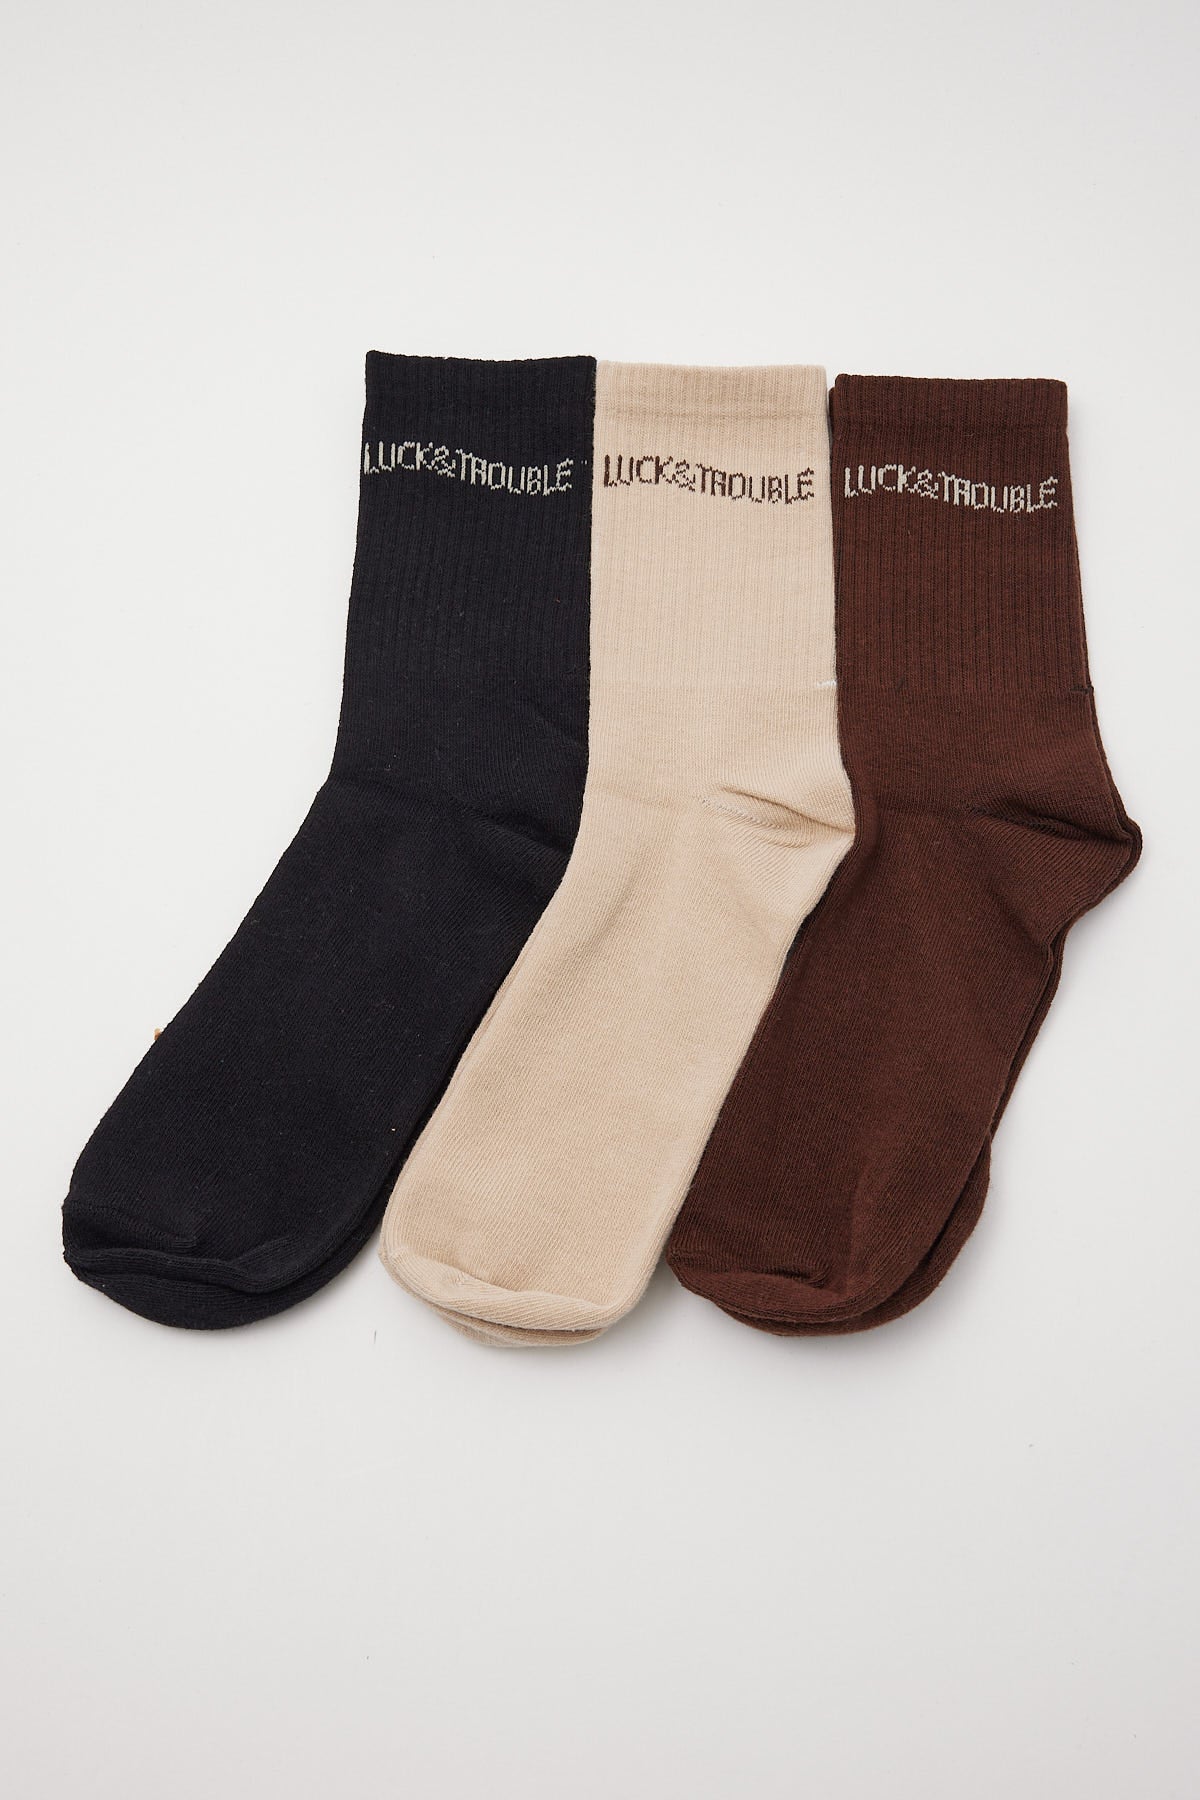 Luck & Trouble Lounge Crew Sock 3 Pack Black/Brown/Oat